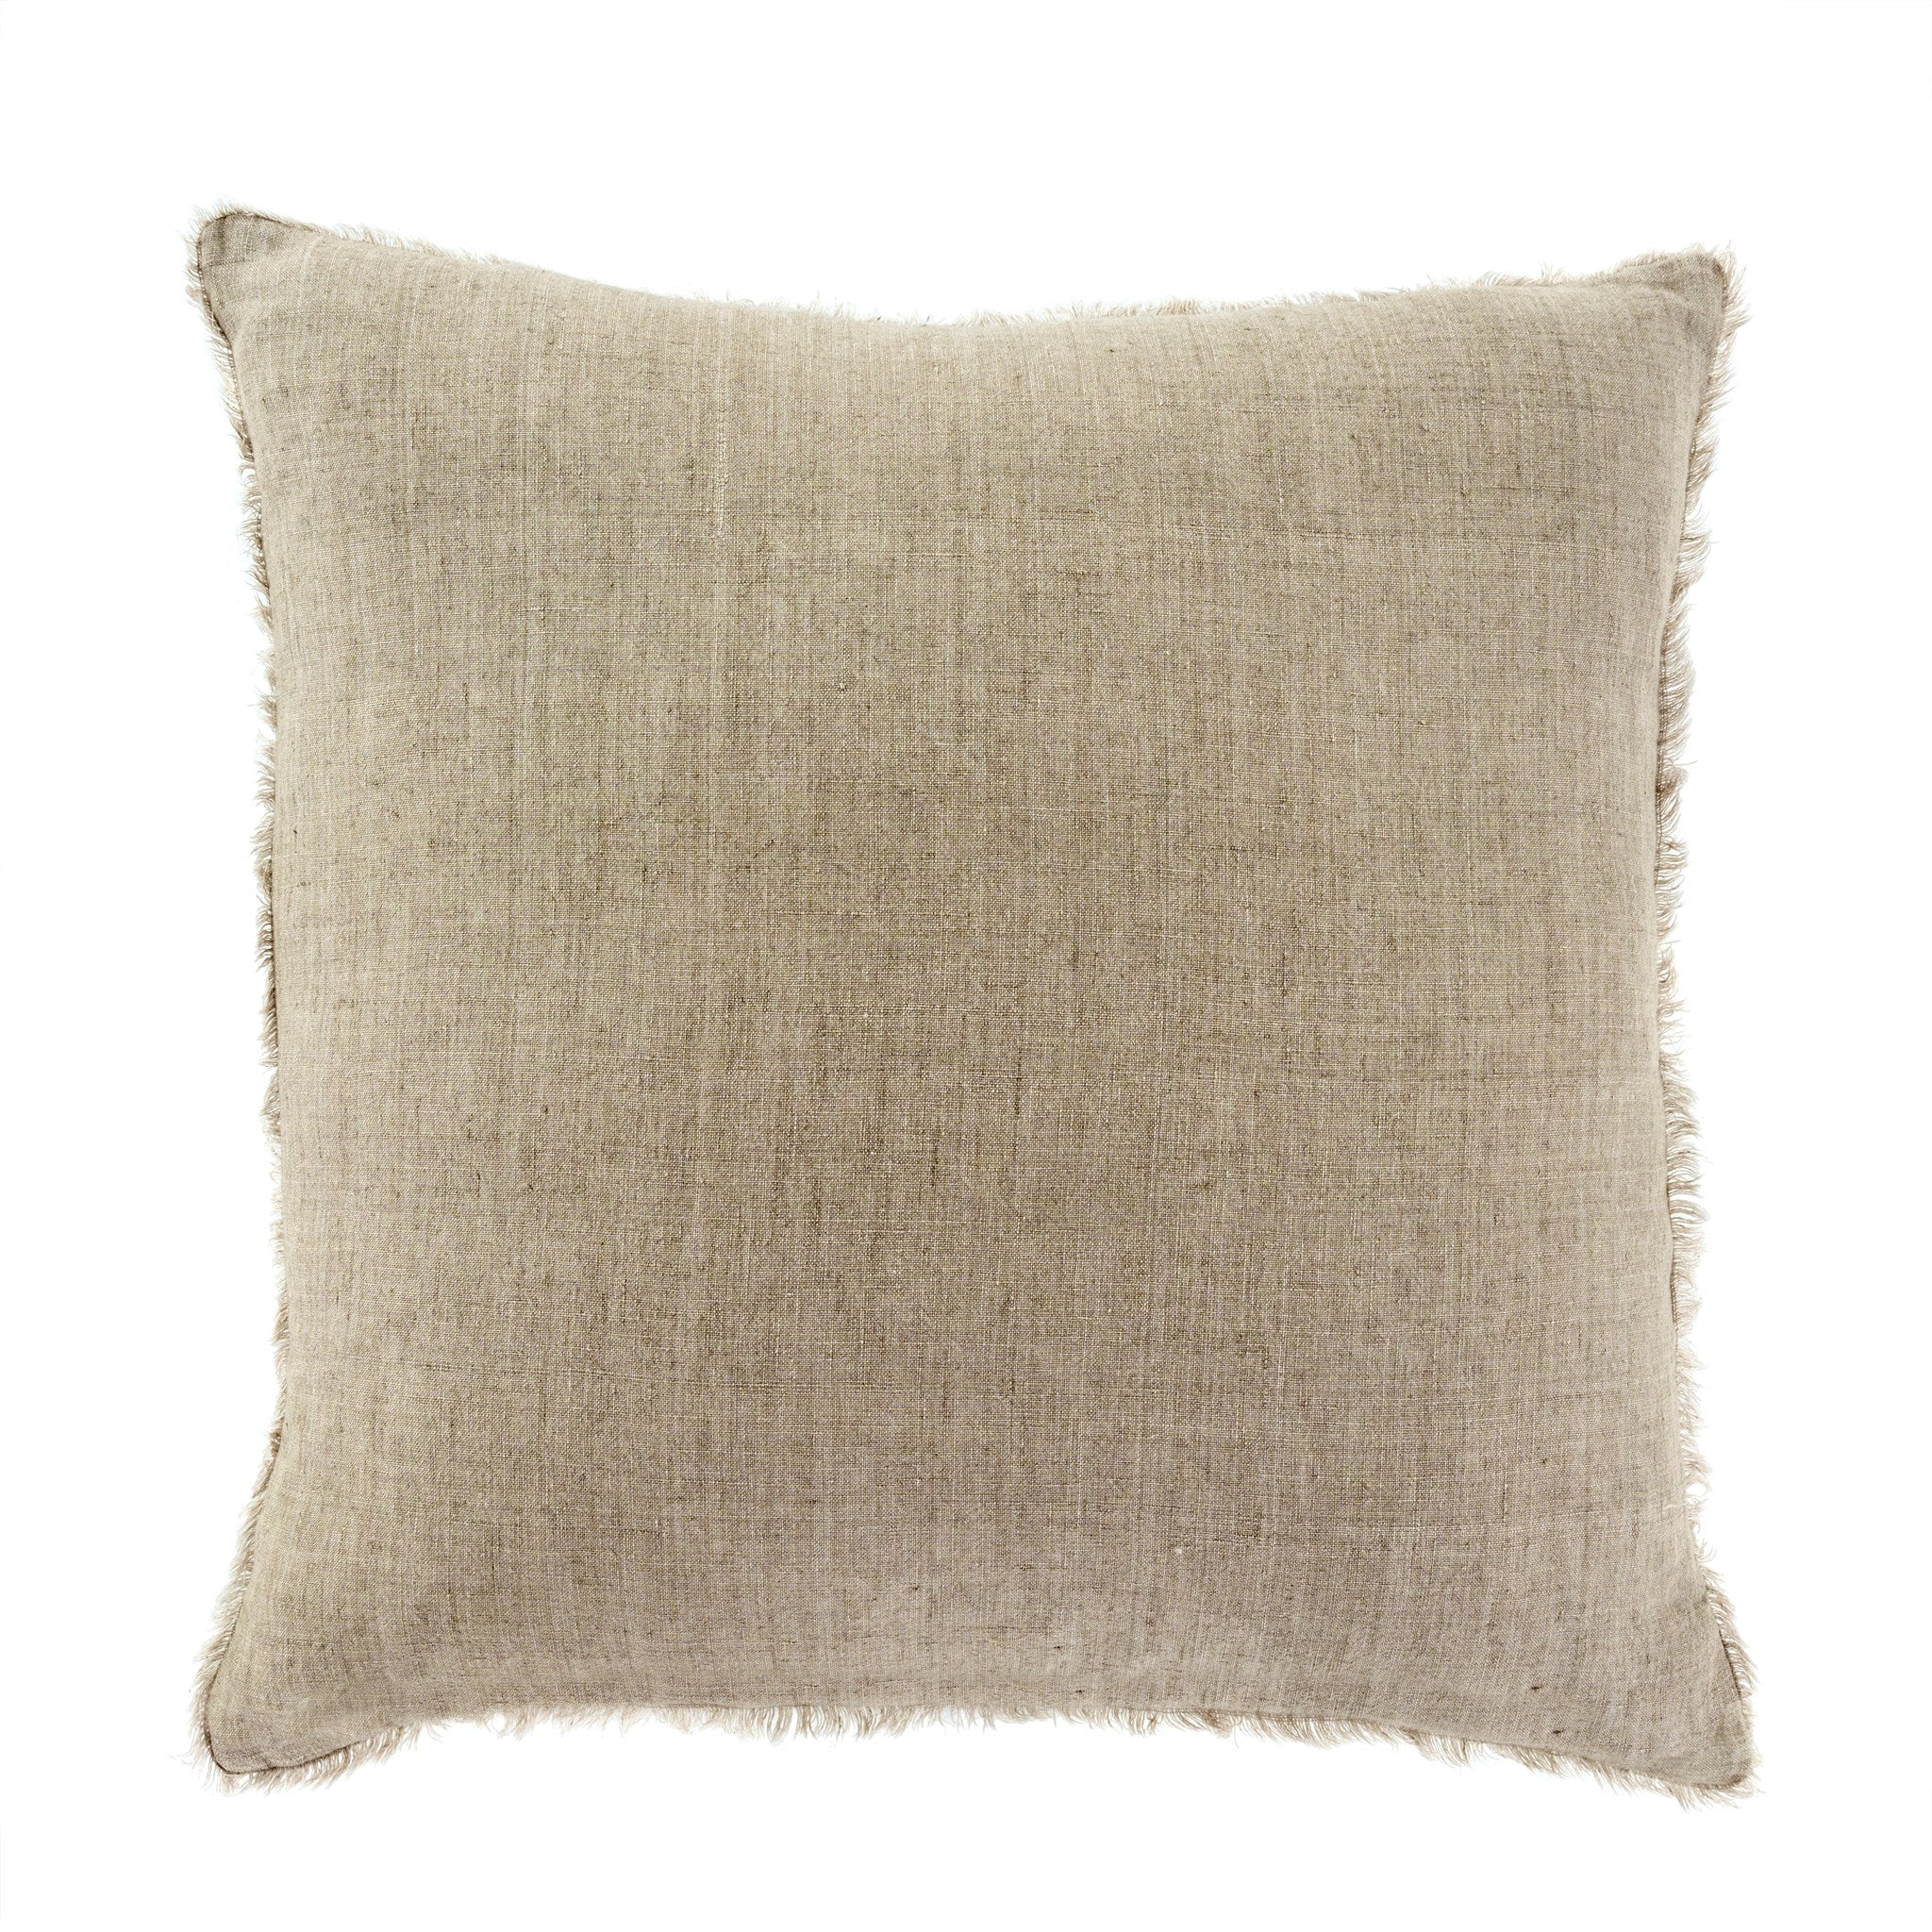 Lina Linen Pillow in Sand